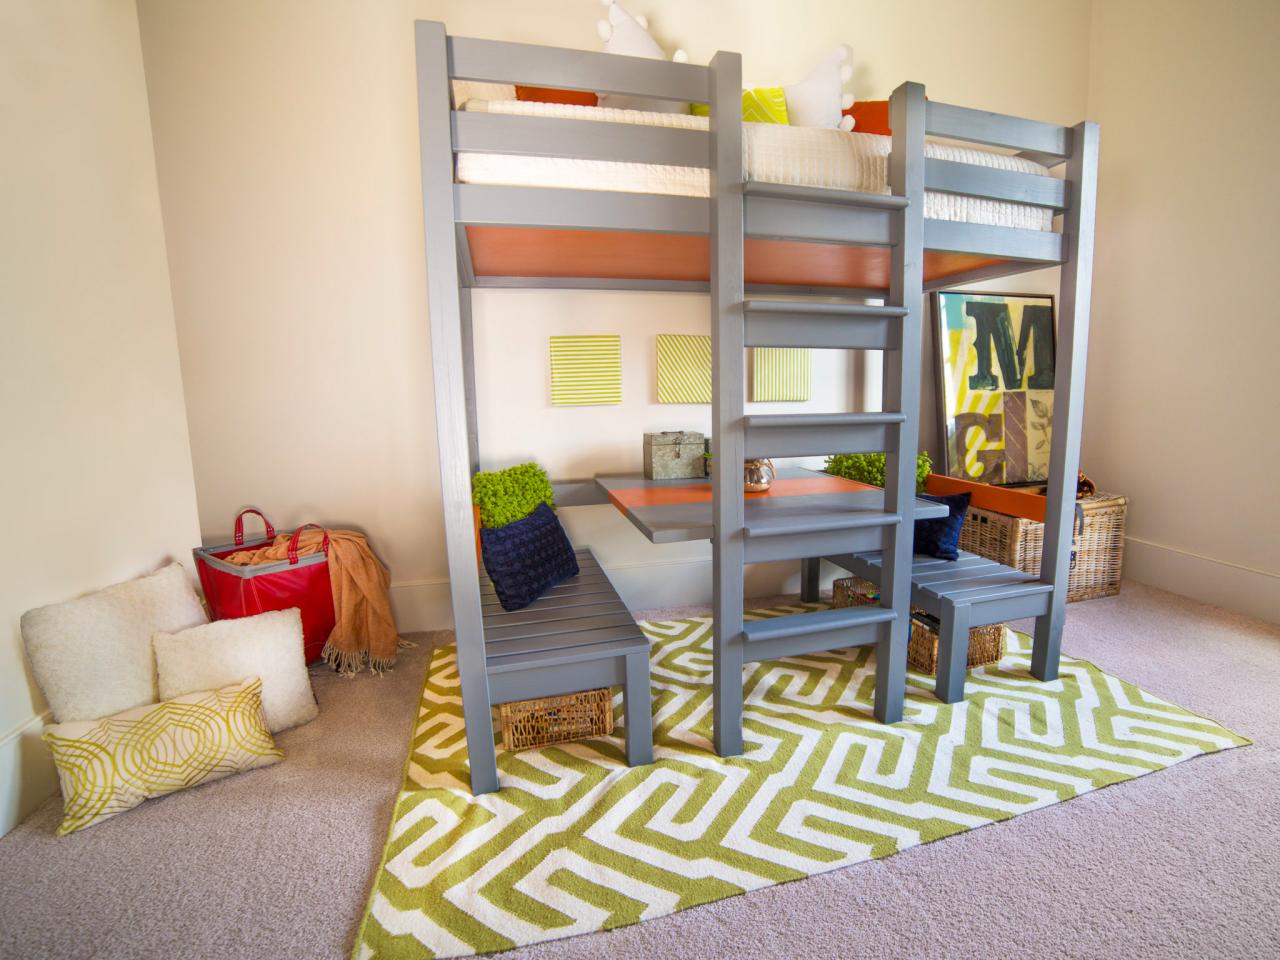 How To Build A Loft Bed With Built In, Bunk Bed With Table Under